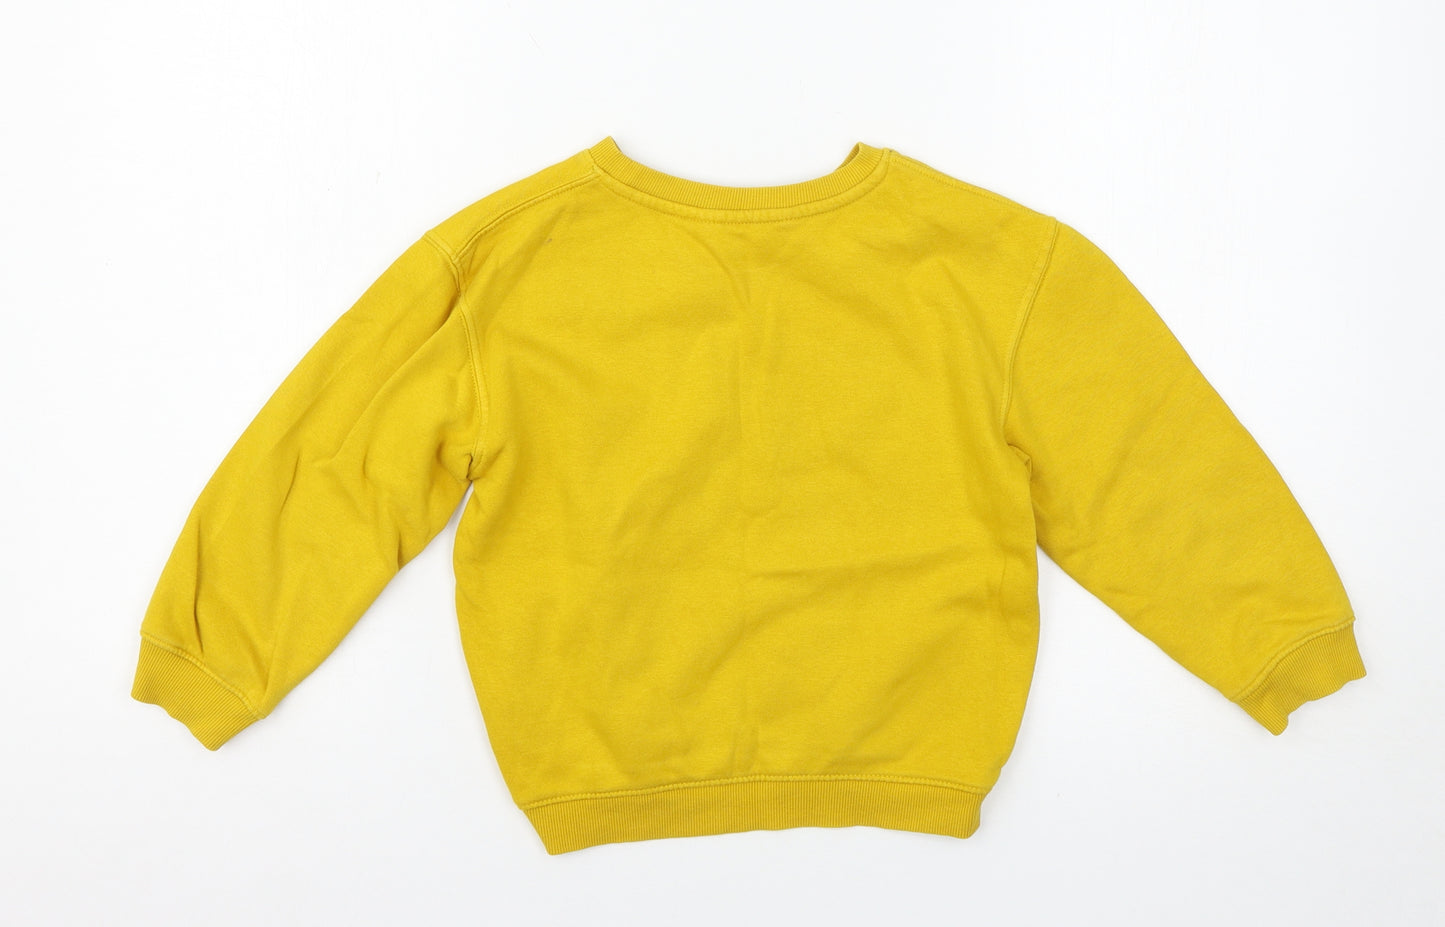 H&M Boys Yellow Crew Neck  Cotton Pullover Jumper Size 5-6 Years